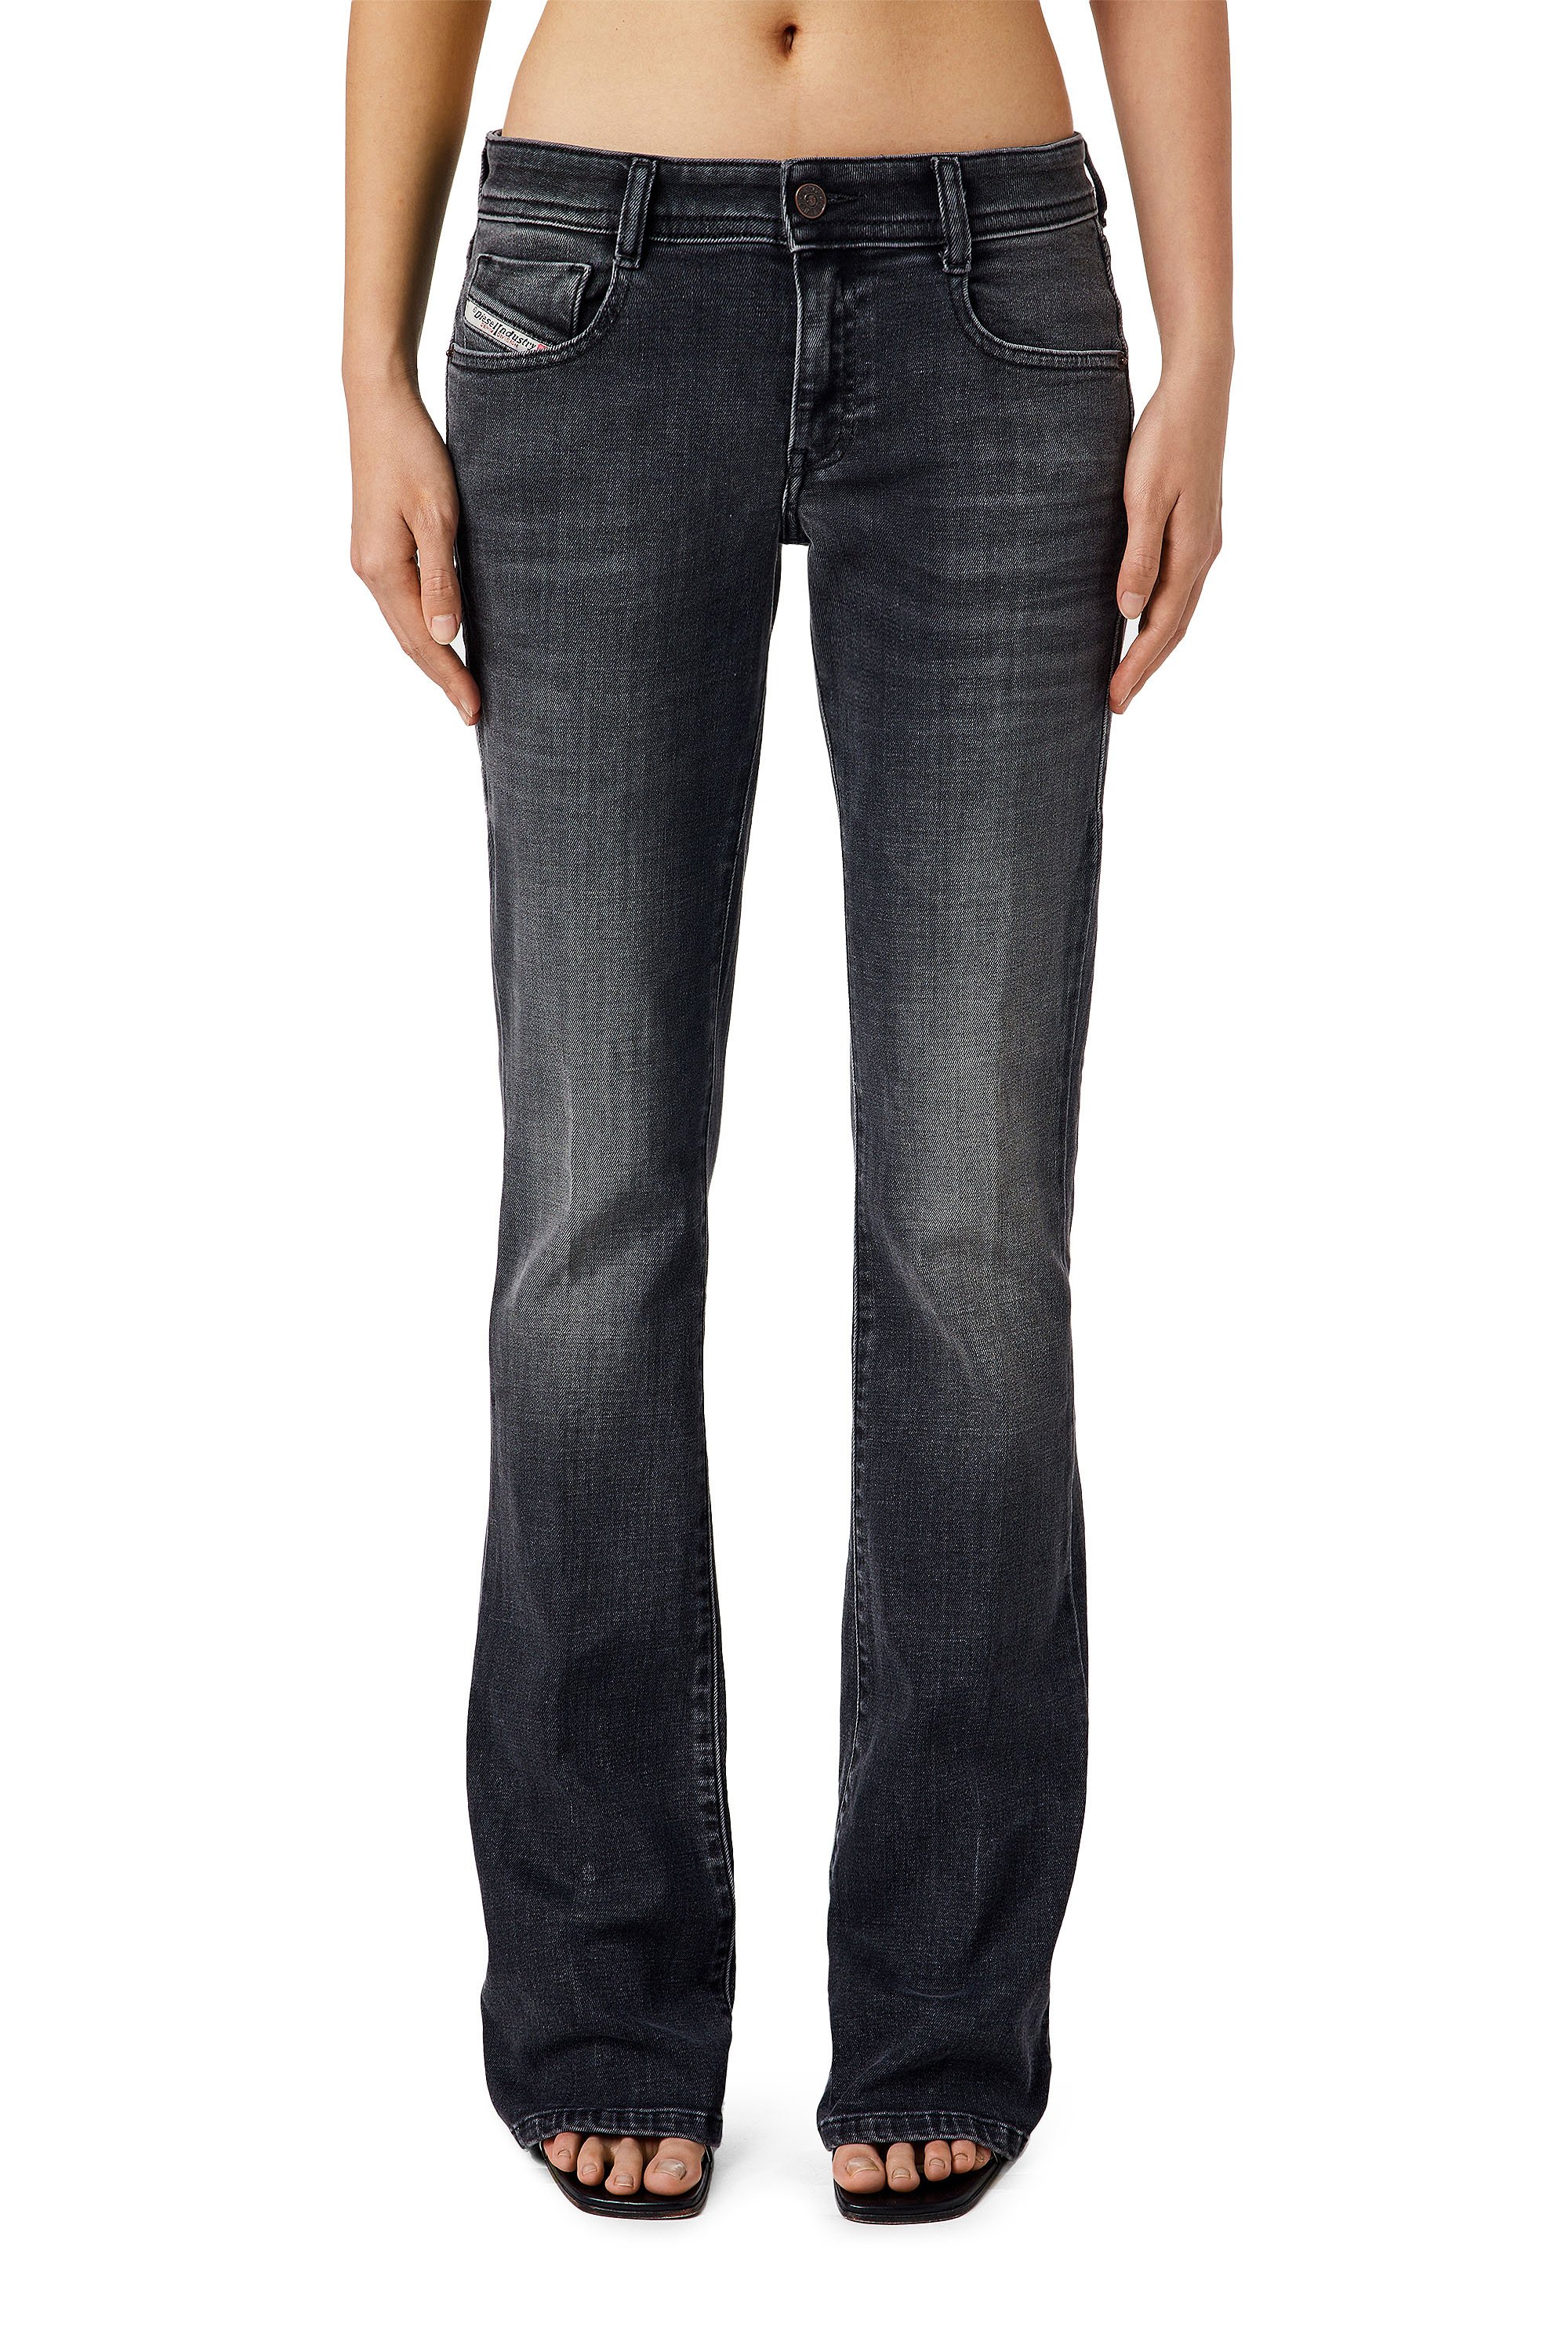 1969 D-EBBEY 0EIAG Bootcut and Flare Jeans, Black/Dark grey - Jeans